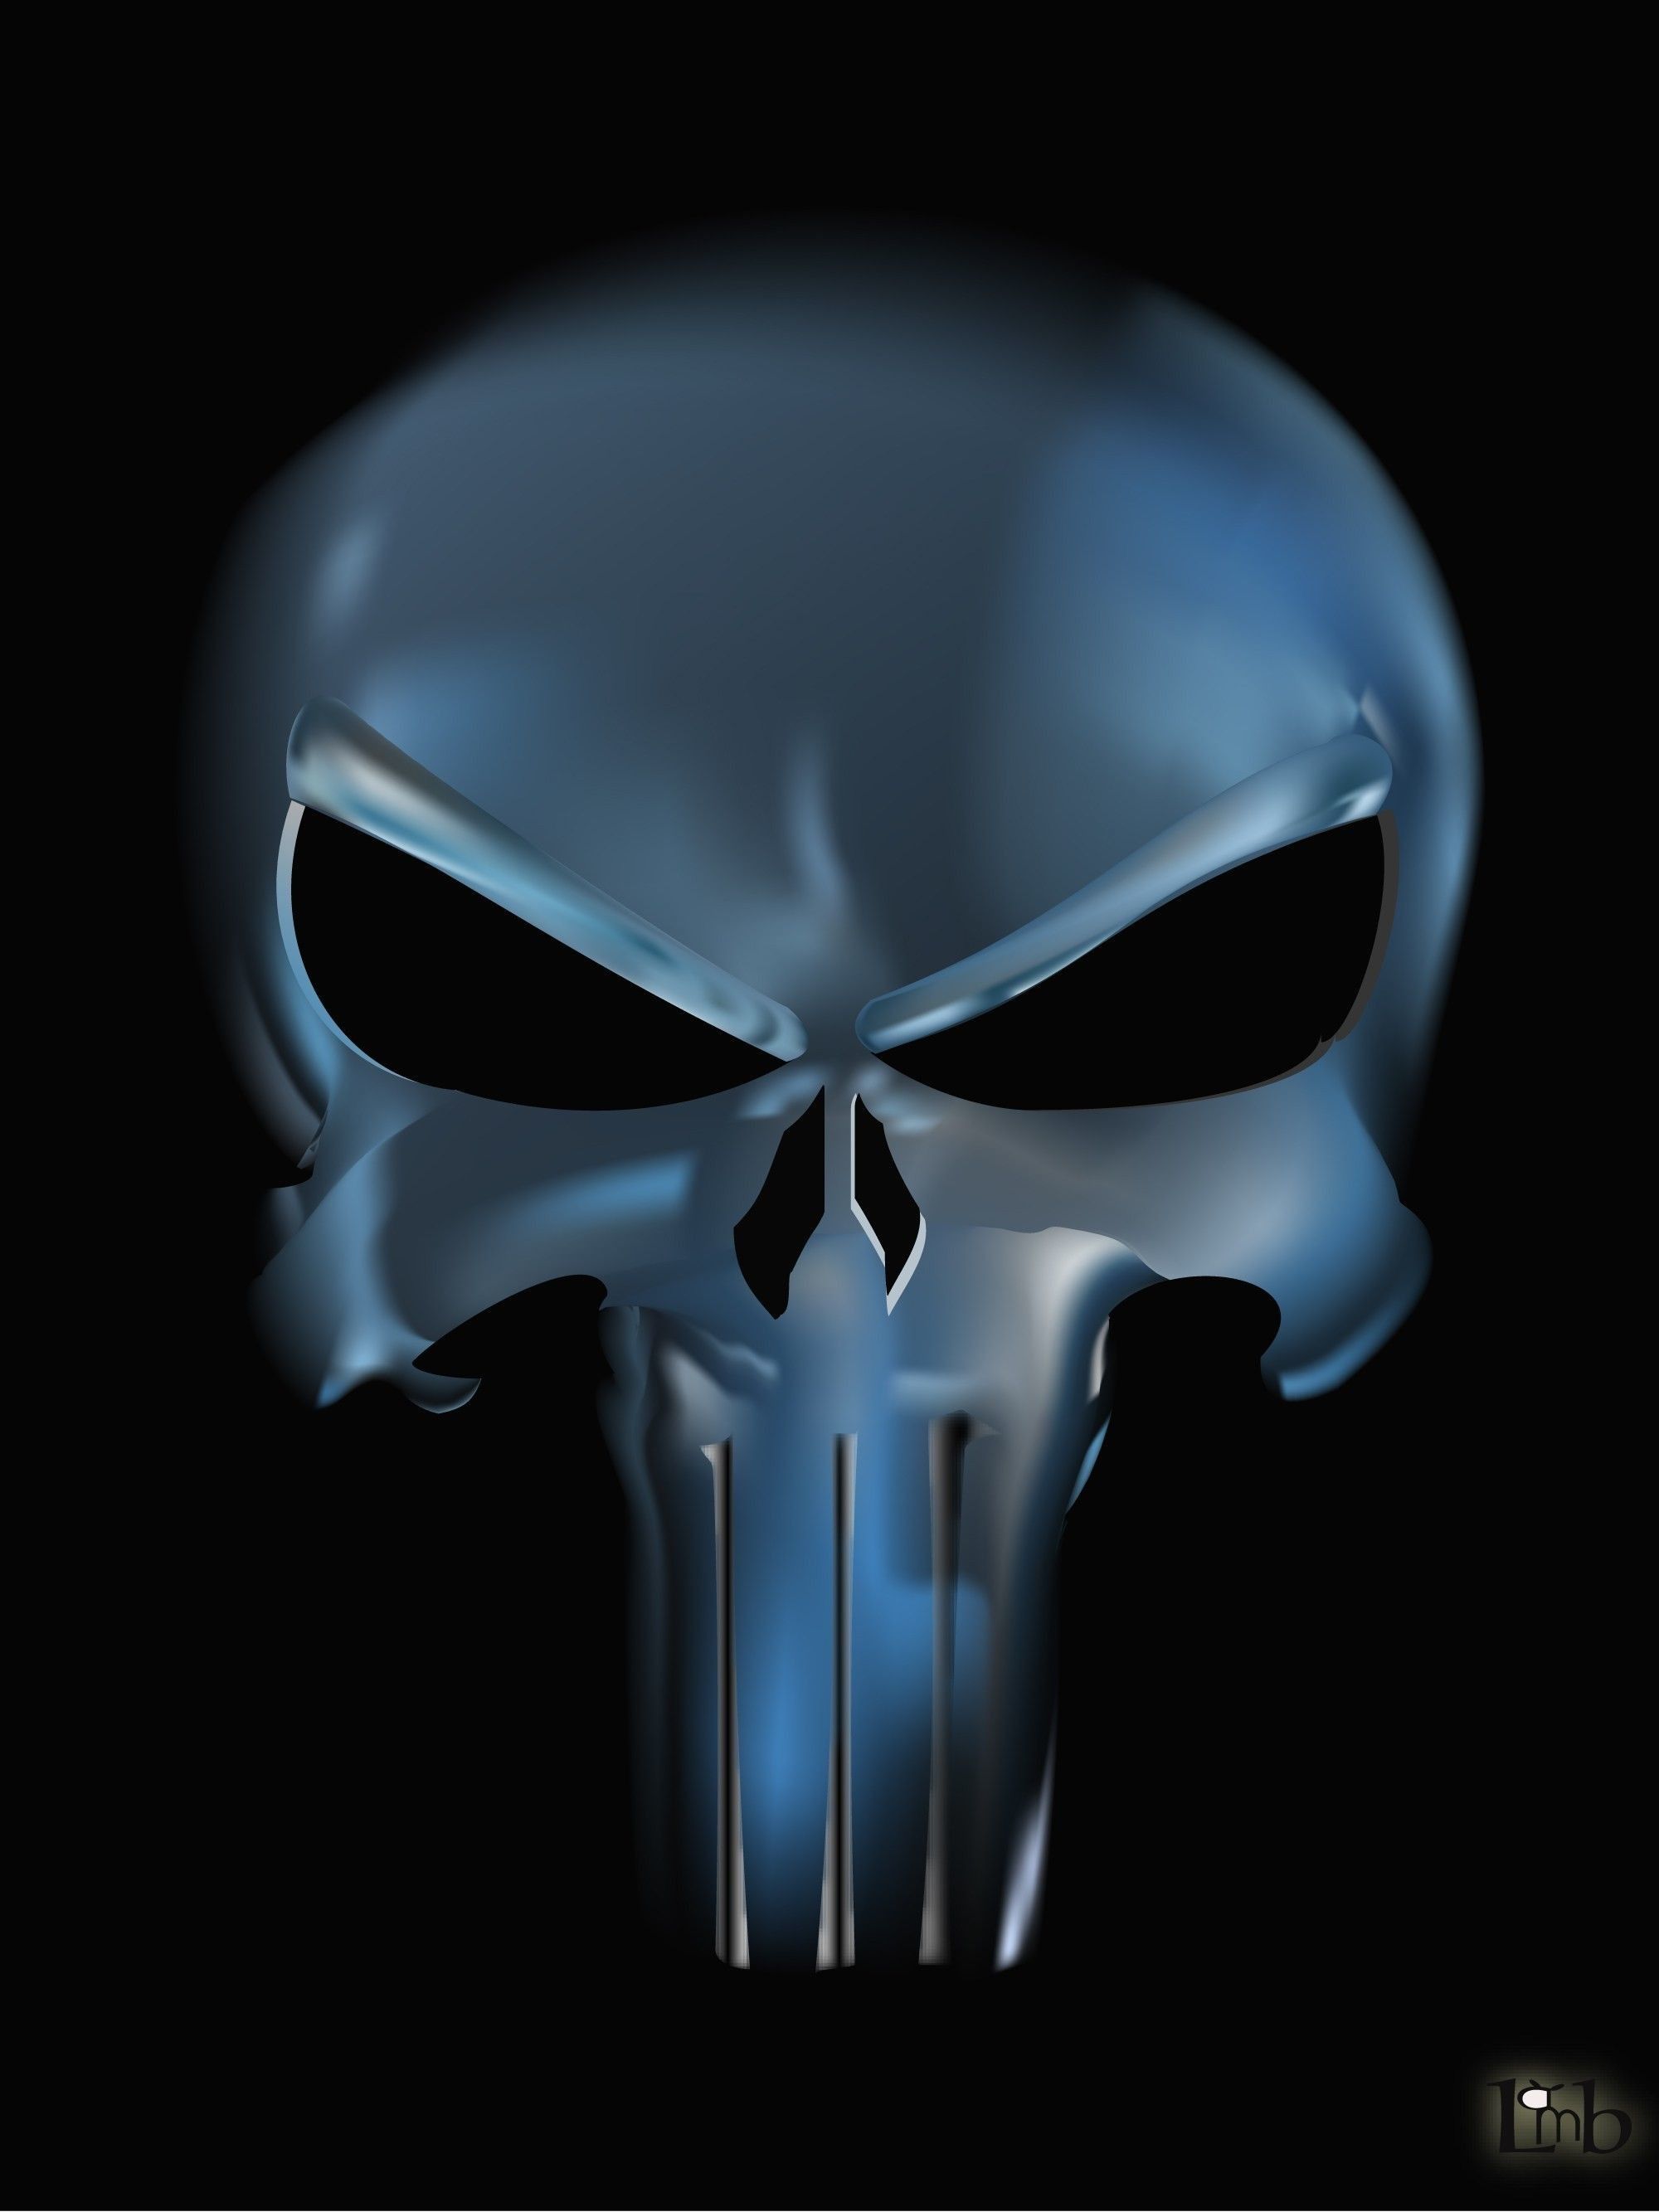 Android 3D Skull Wallpapers - Wallpaper Cave